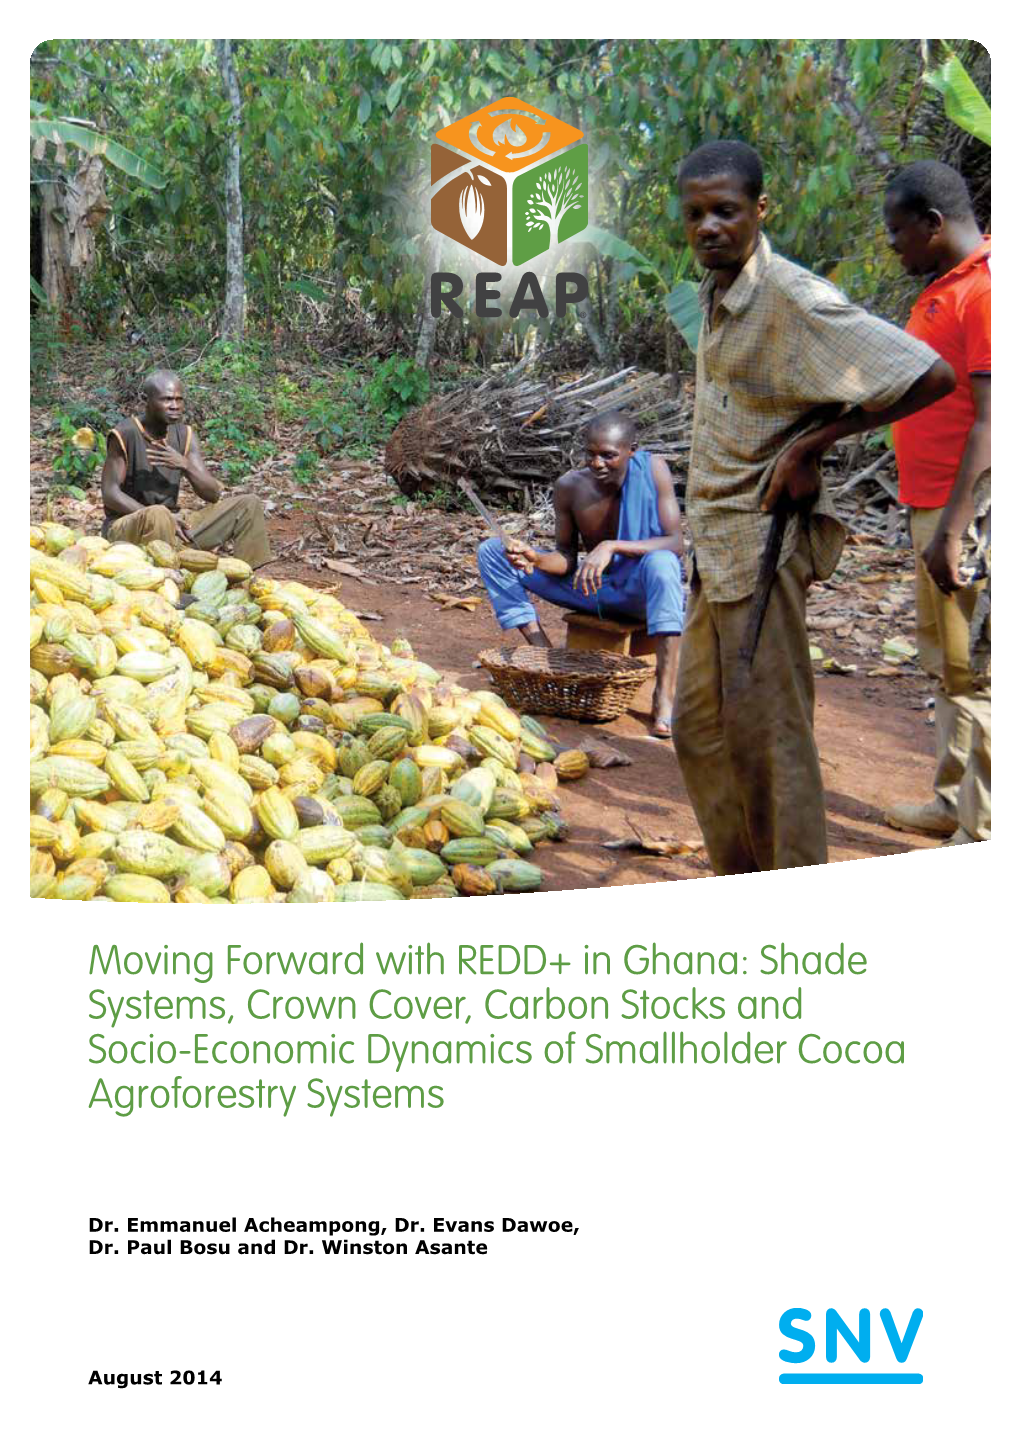 Moving Forward with REDD+ in Ghana: Shade Systems, Crown Cover, Carbon Stocks and Socio-Economic Dynamics of Smallholder Cocoa Agroforestry Systems